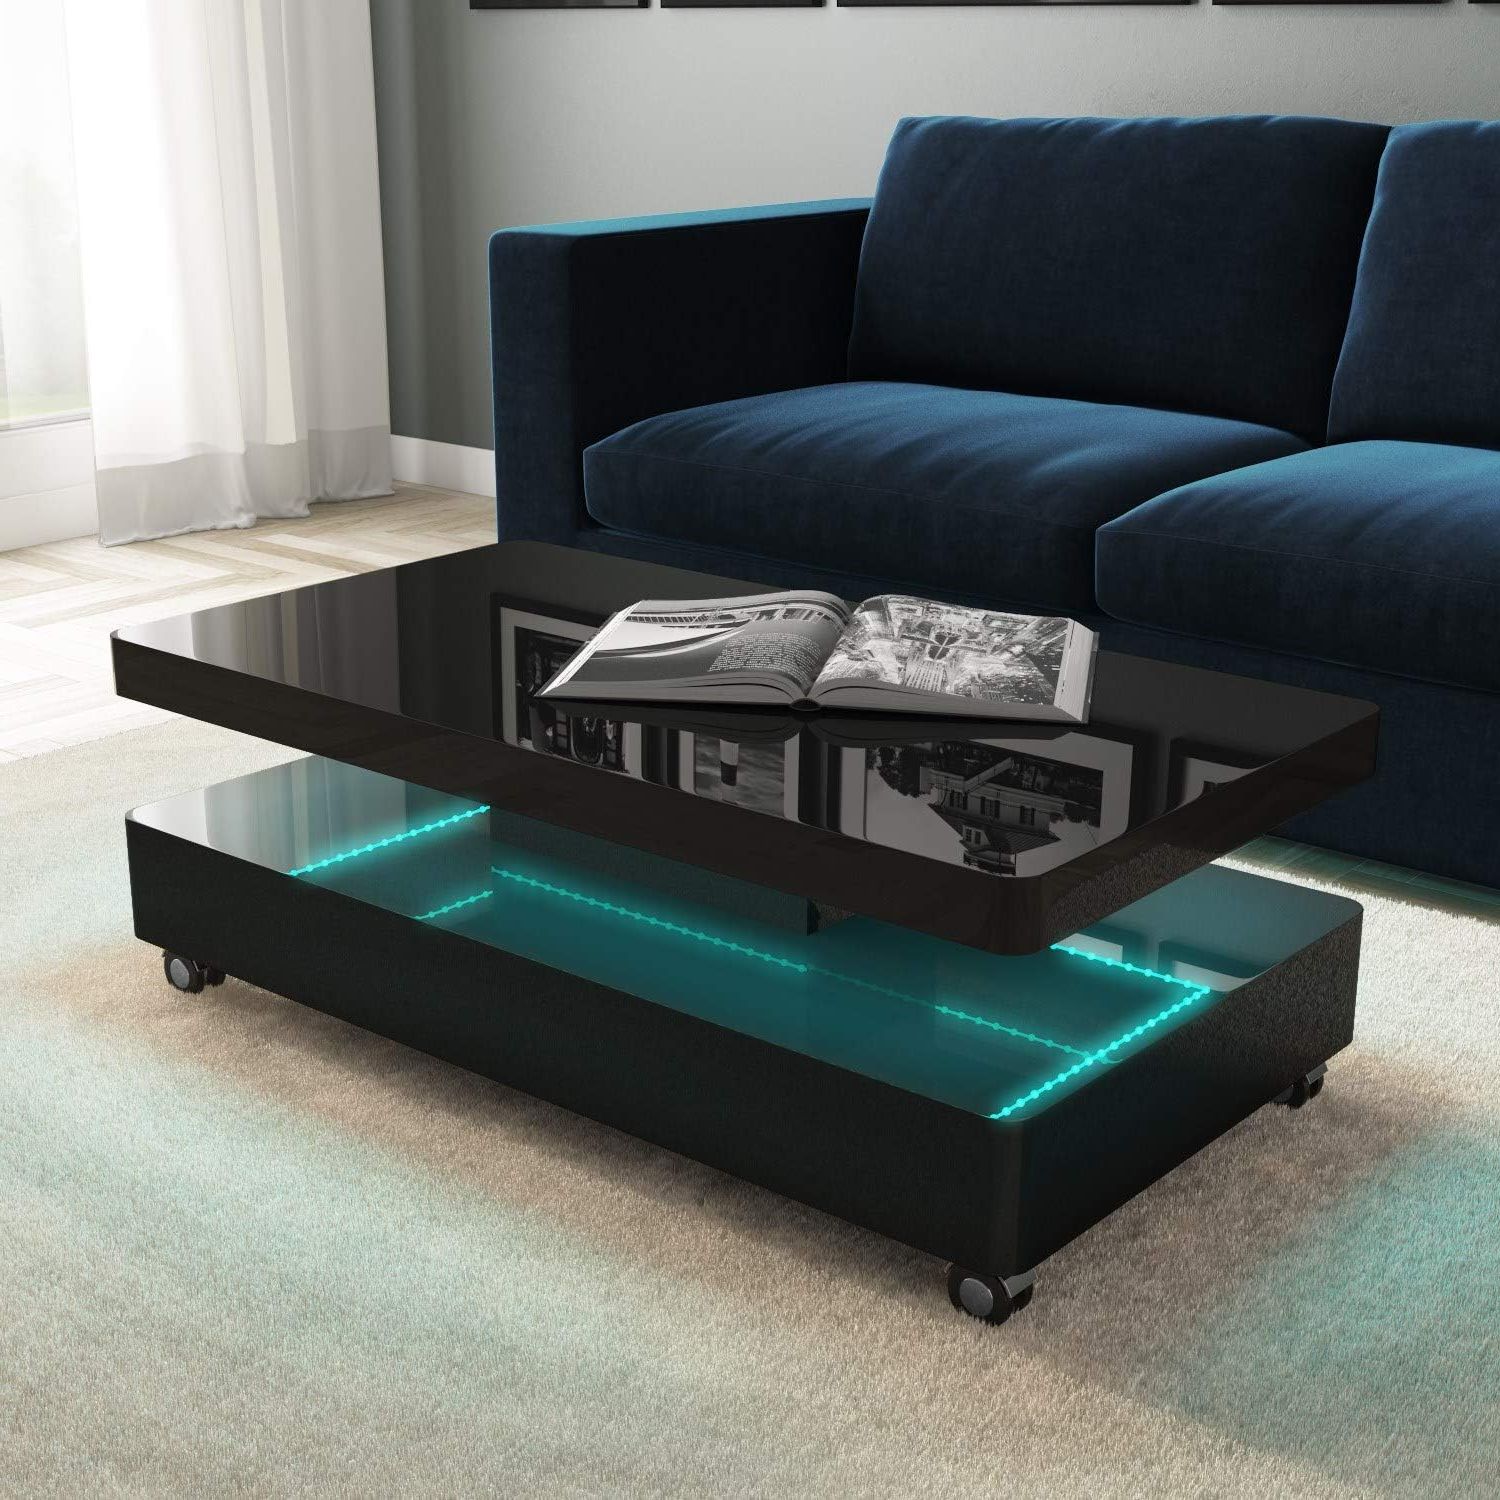 Tiffany Rectangular Coffee Table In Black Gloss: Amazon.co.uk: Kitchen Pertaining To Famous High Gloss Black Coffee Tables (Photo 5 of 15)